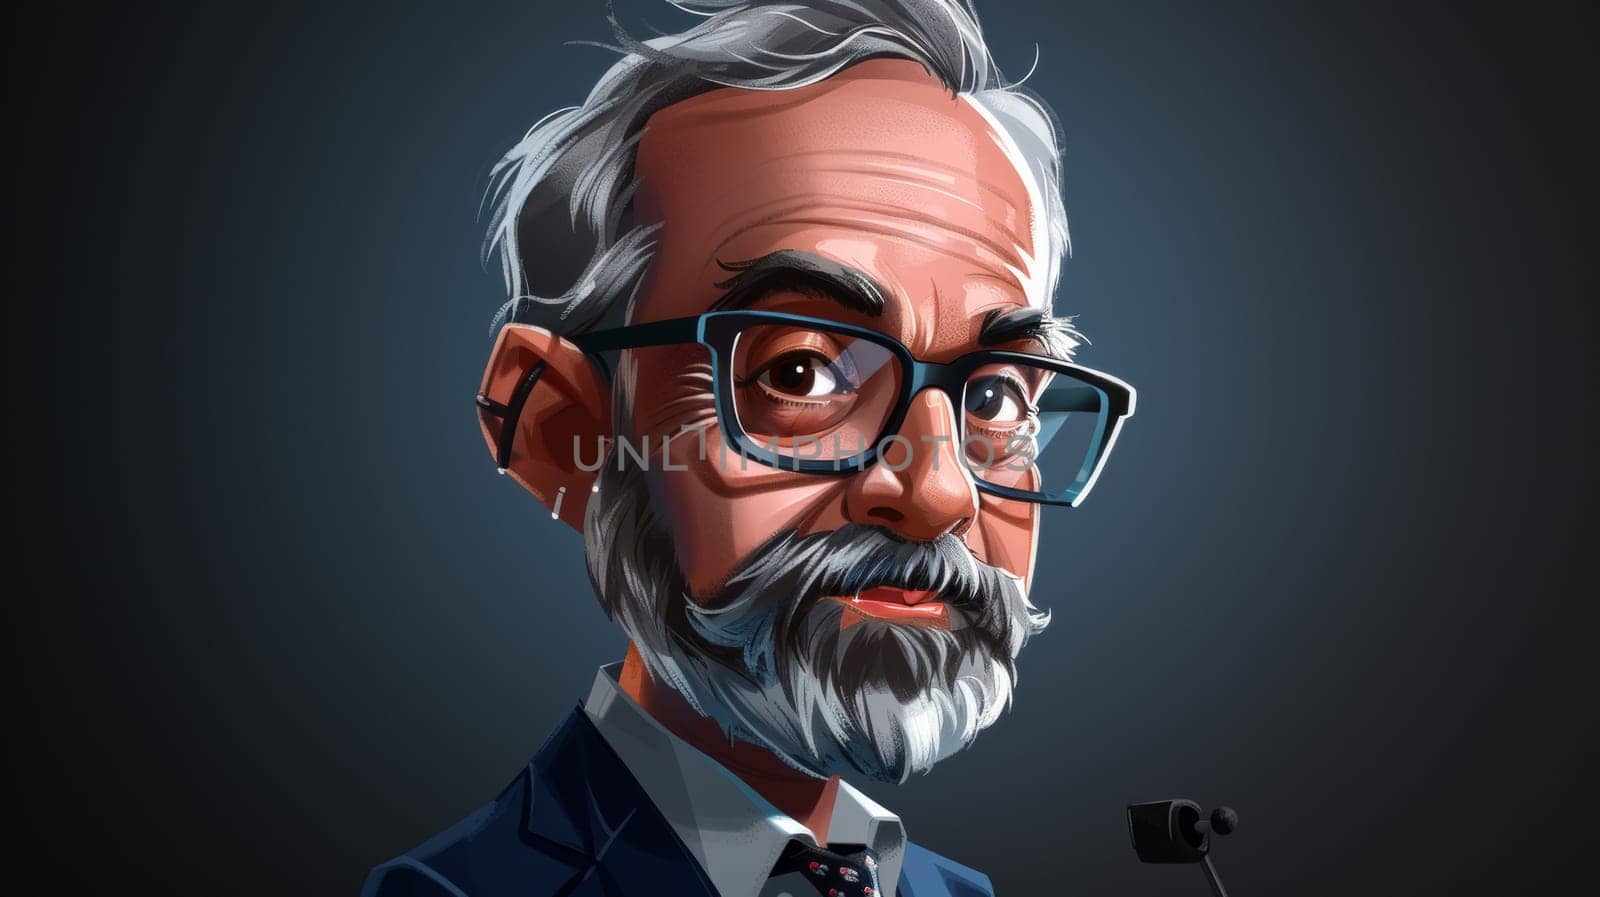 A cartoon of a man with glasses and beard is holding something